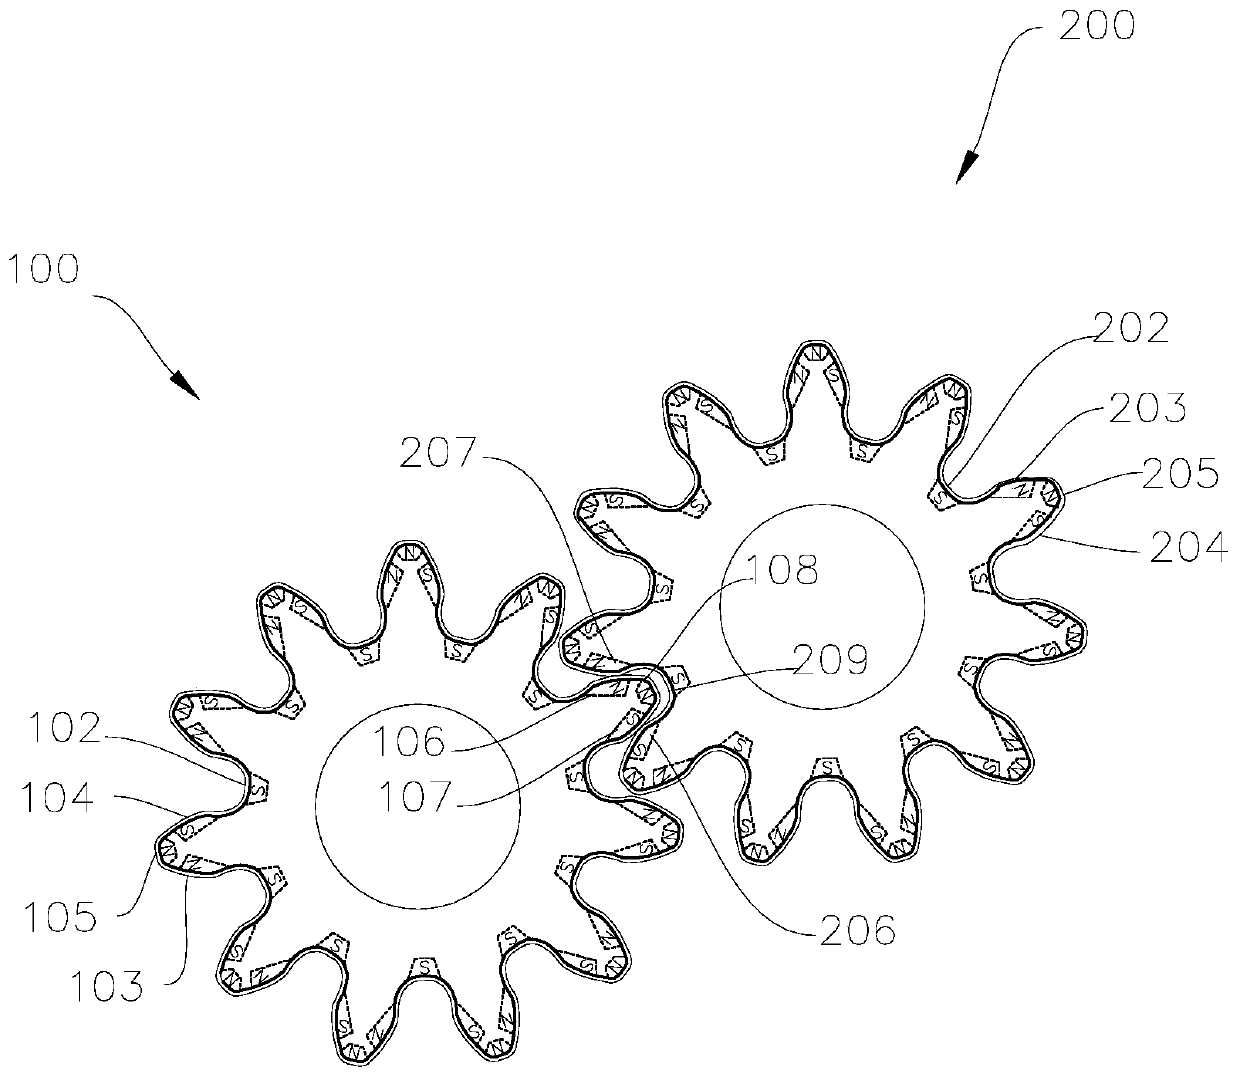 Magnetic gear, magnetic gear driver and motor